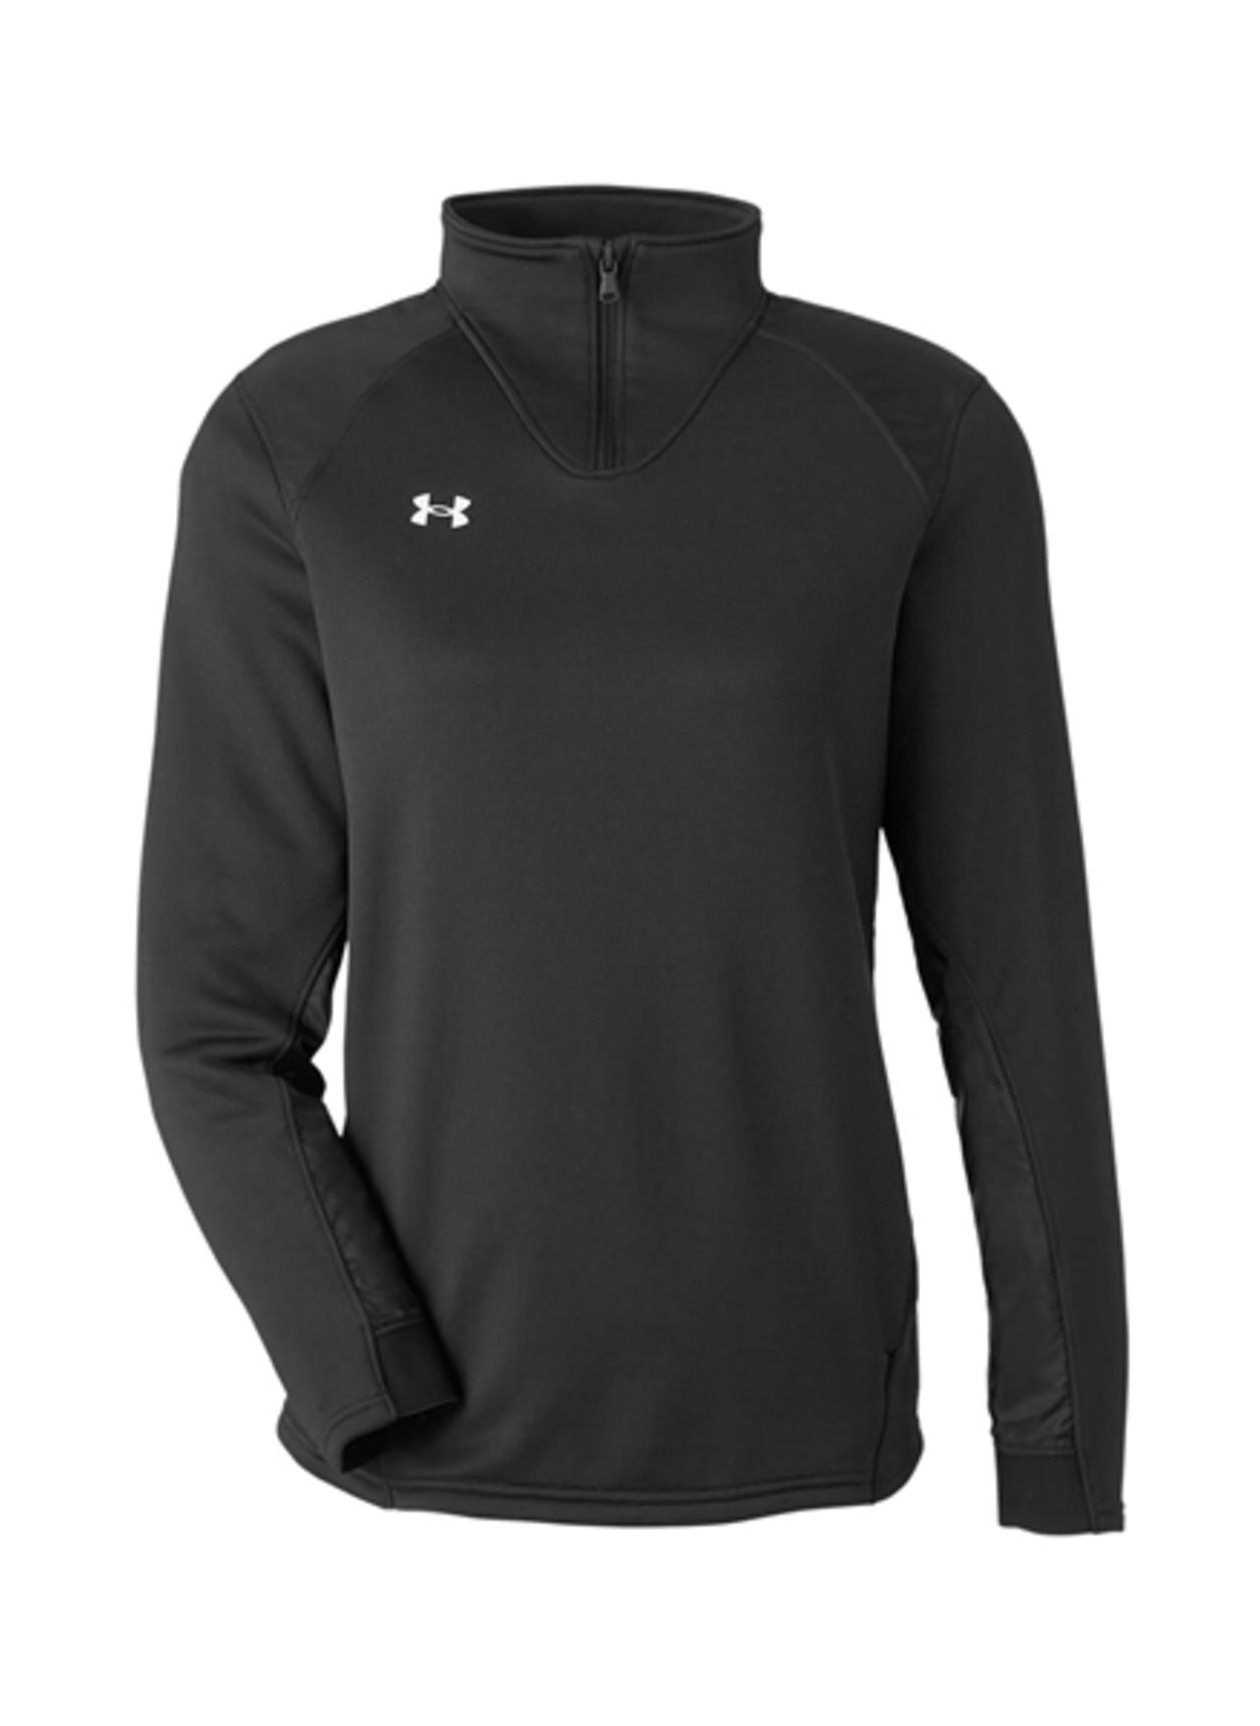 Under Armour Ladies Command Quarter-Zip with custom logo embroidery